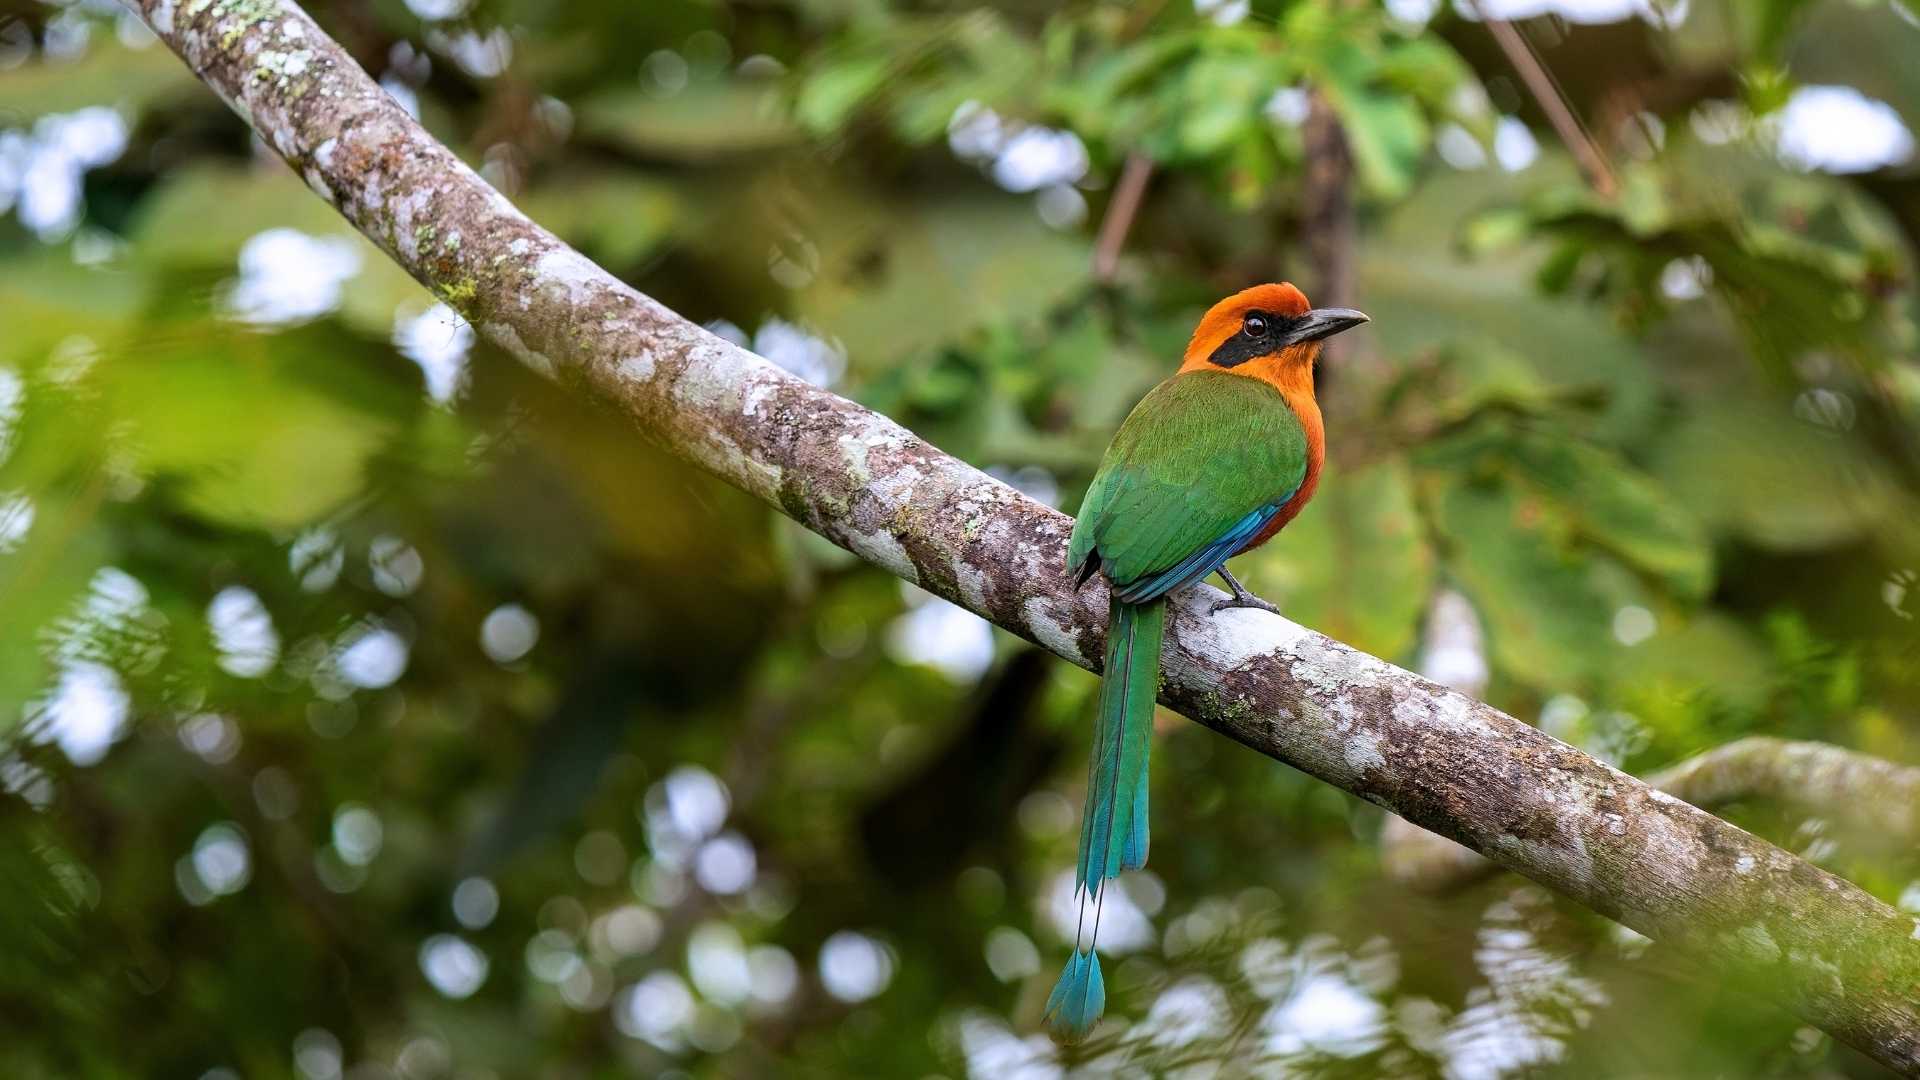  Ecuador | A travelers guide to Mindo - not only birds and butterflies!